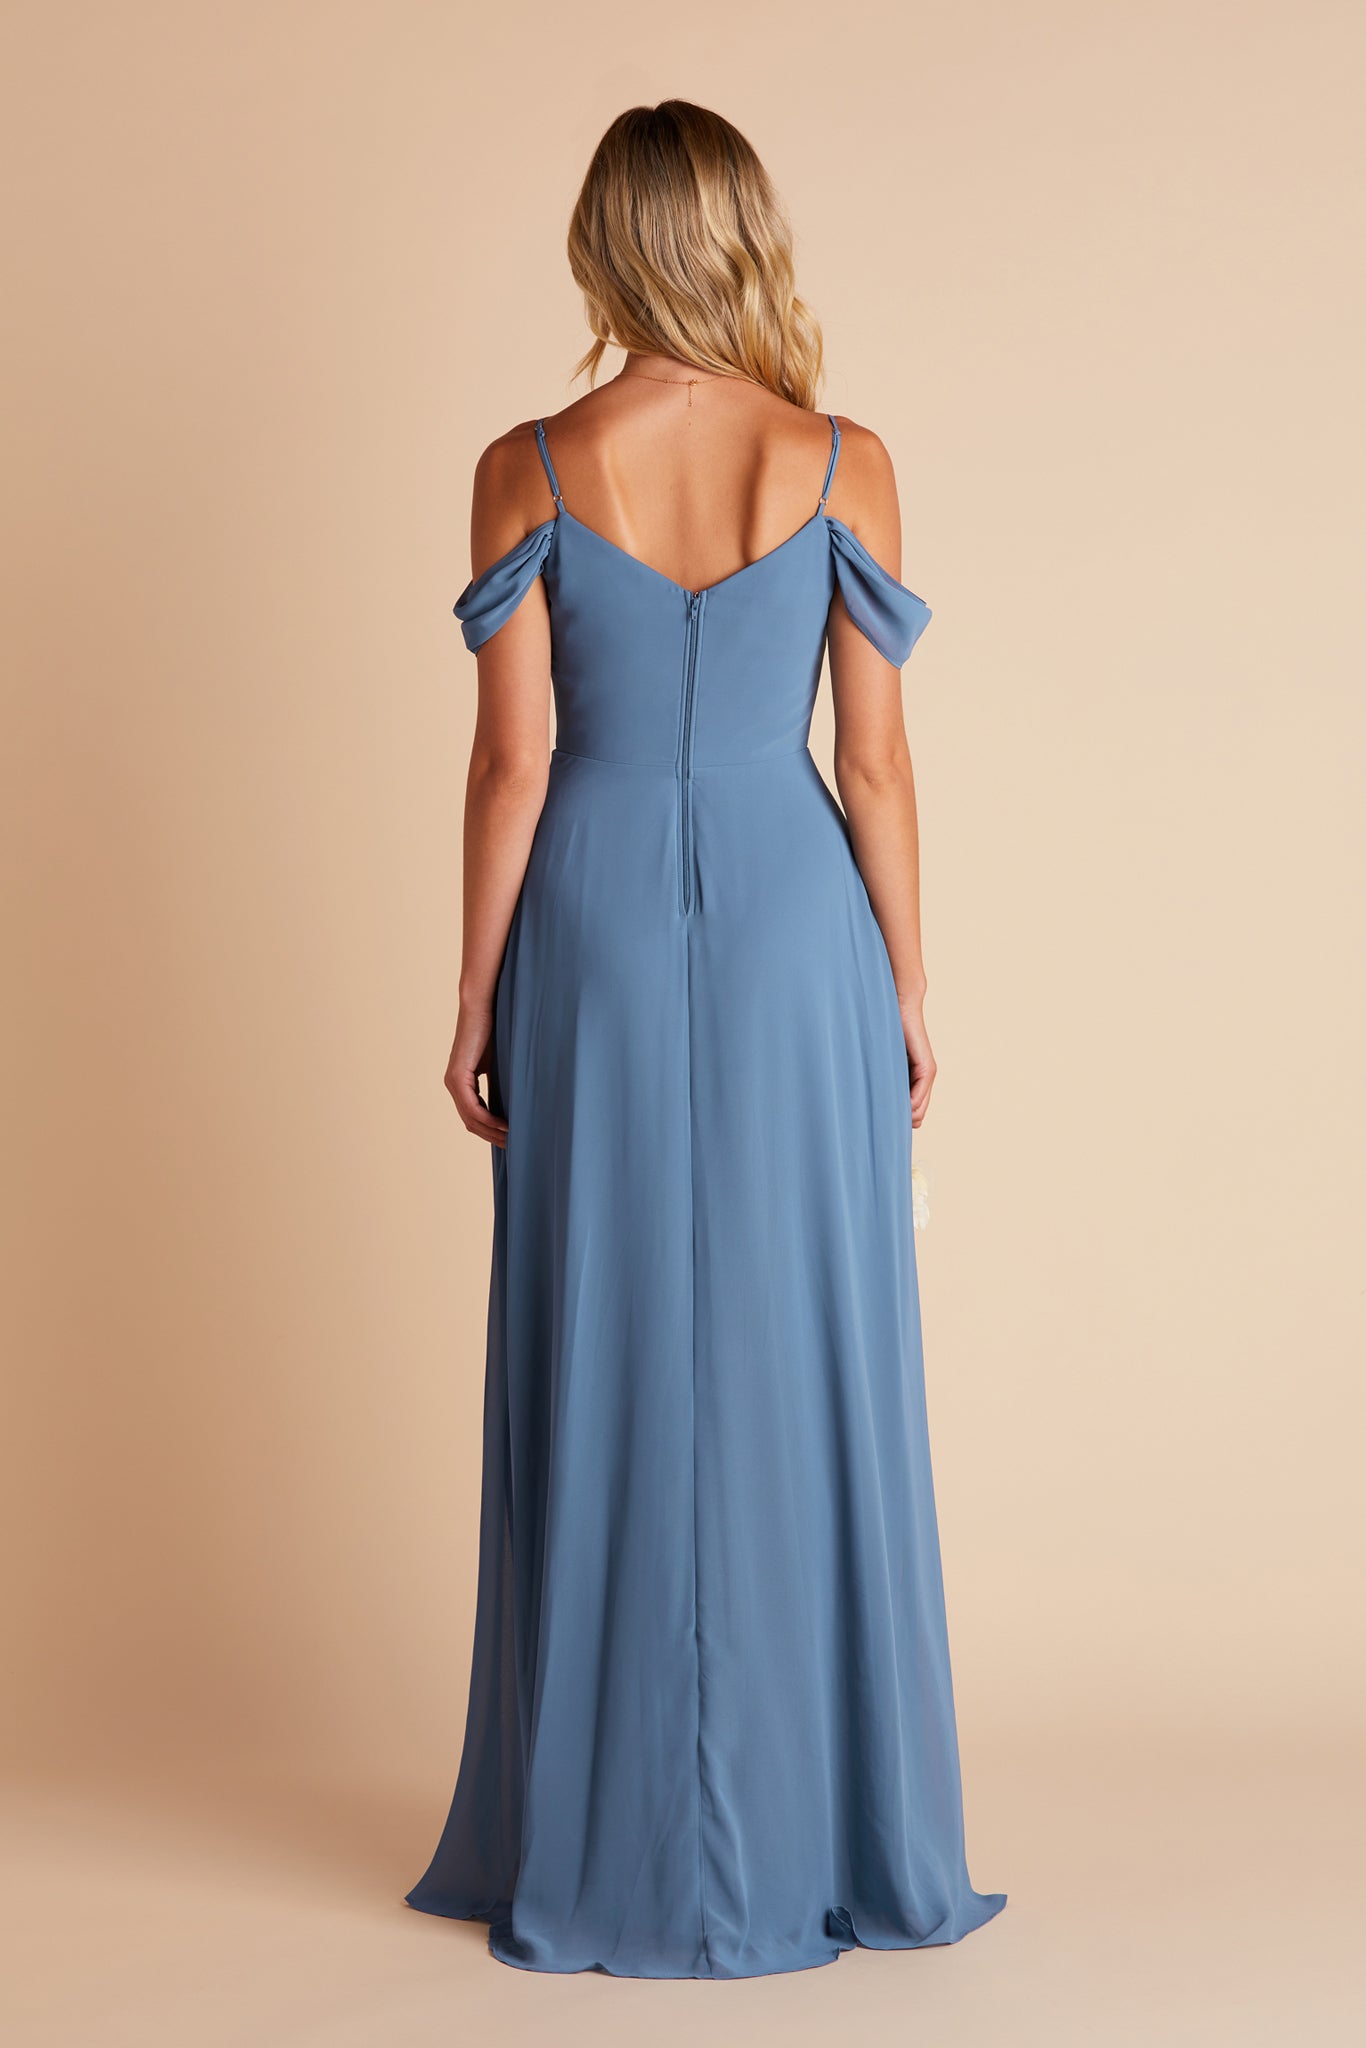 Devin convertible bridesmaids dress with slit in twilight blue chiffon by Birdy Grey, back view